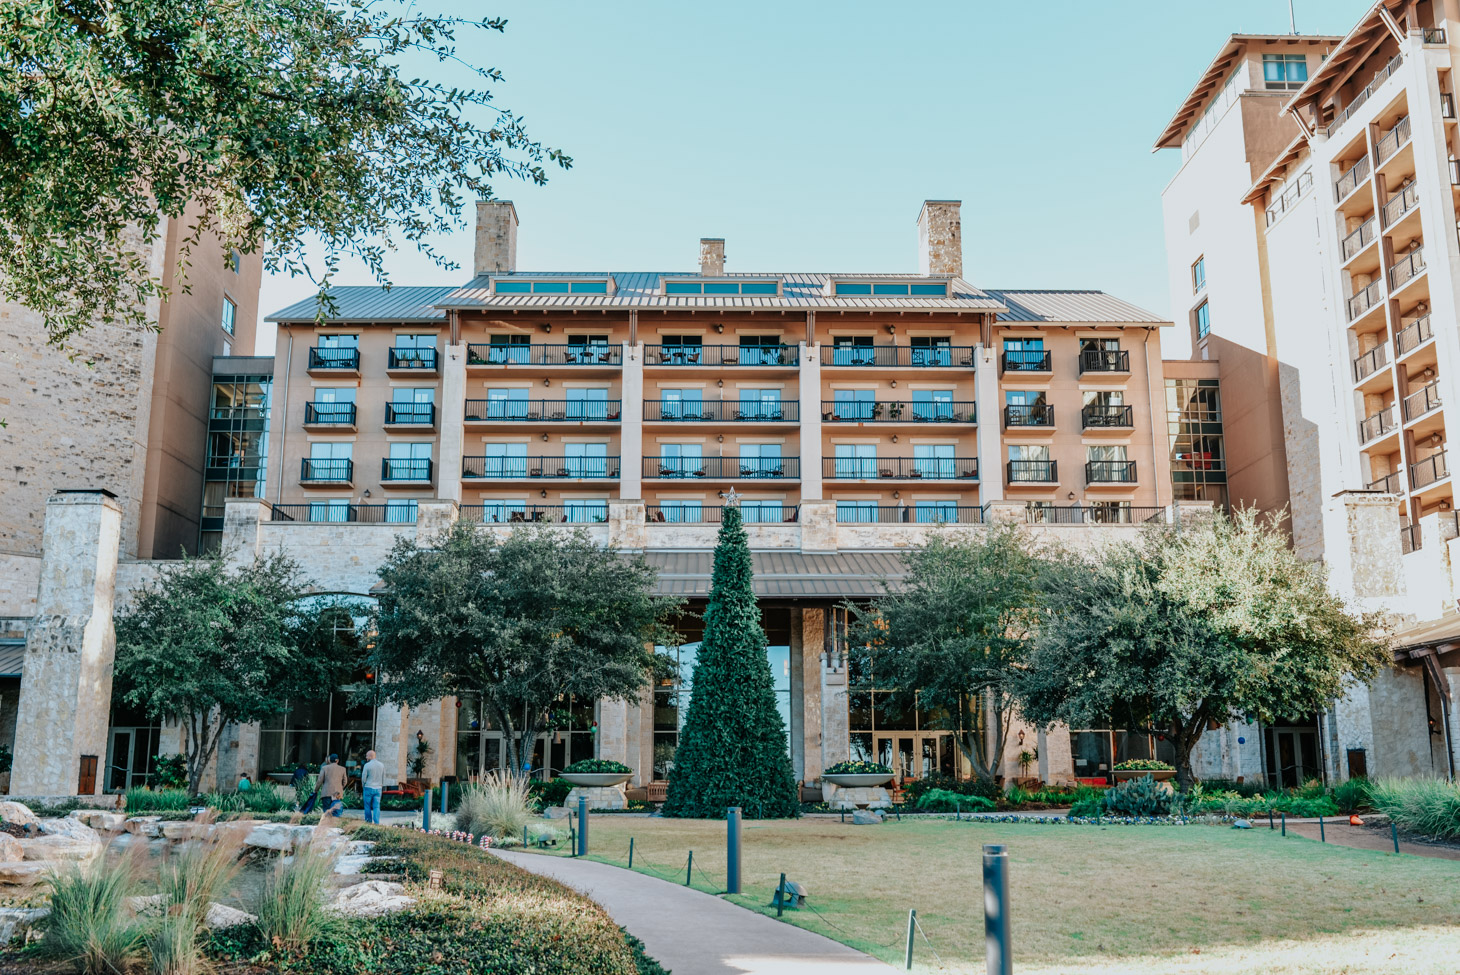 San Antonio in Winter featured by top US travel blog Lone Star Looking Glass